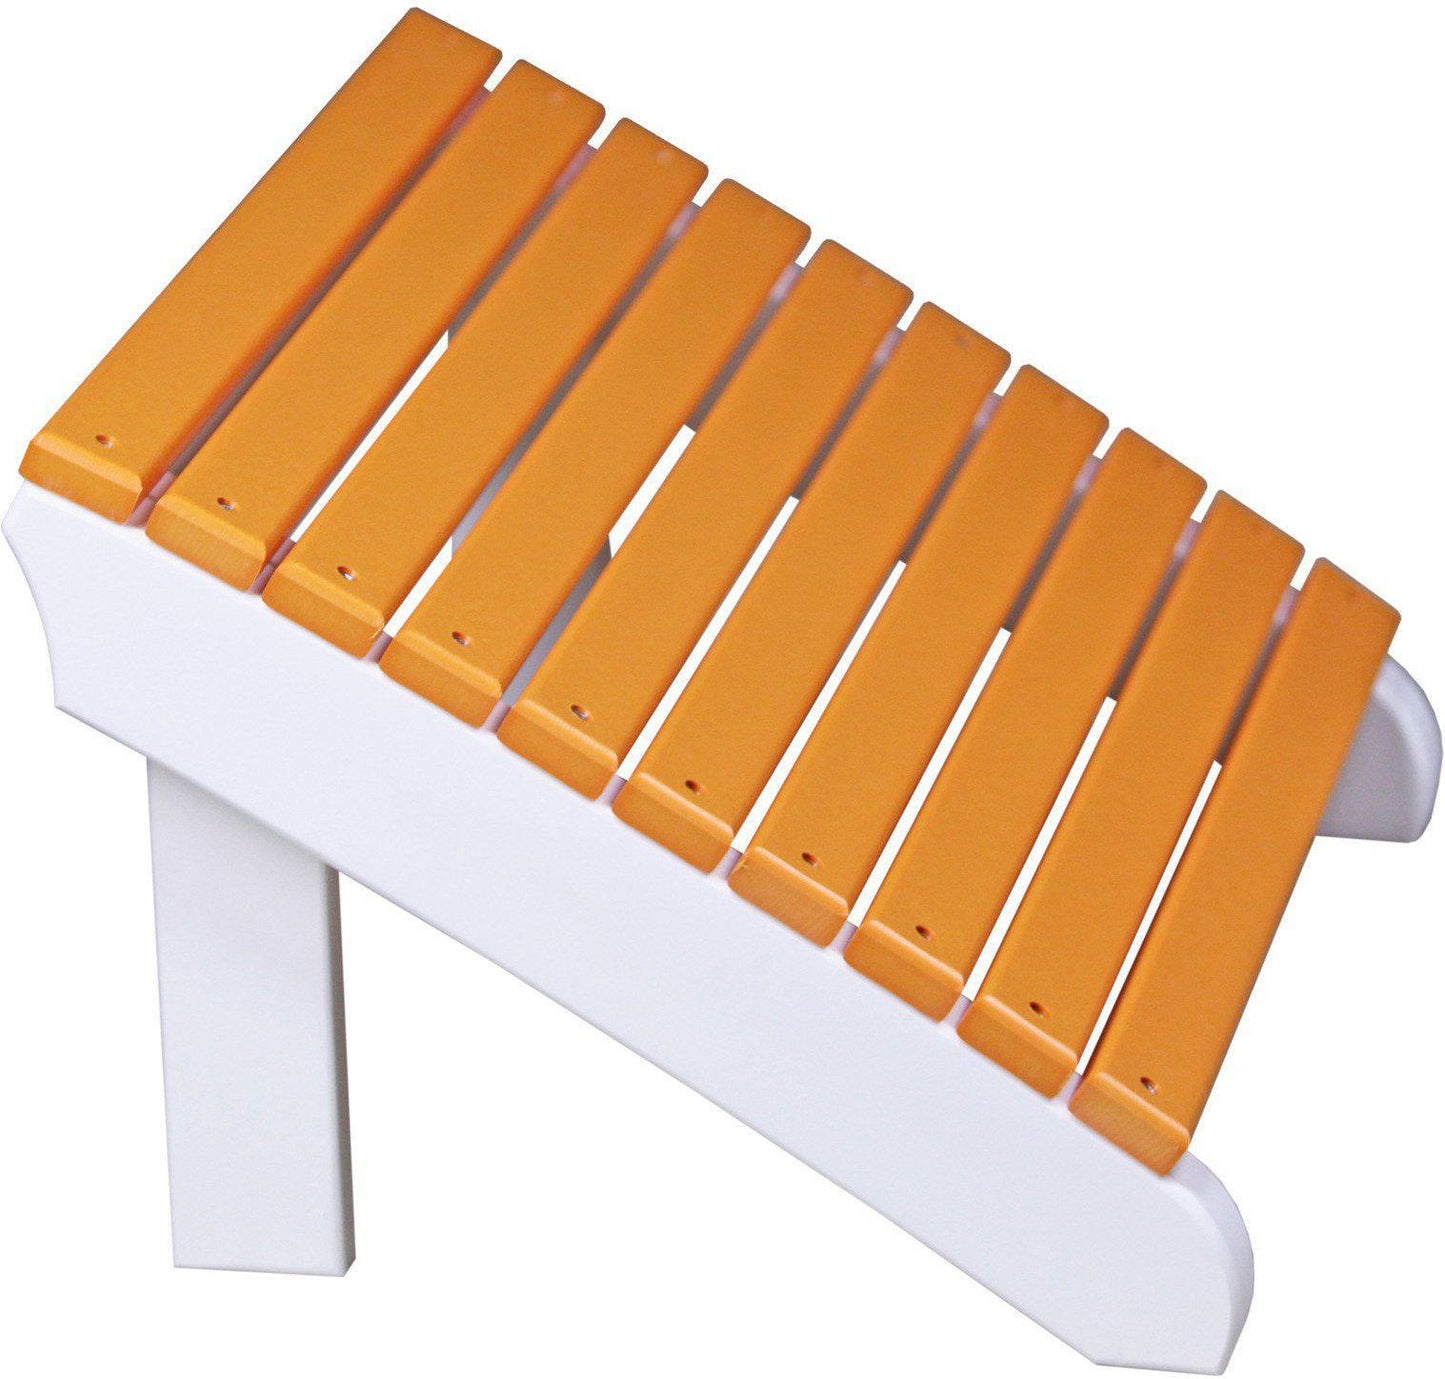 LuxCraft Recycled Plastic Deluxe Adirondack Footrest - Tangerine on White